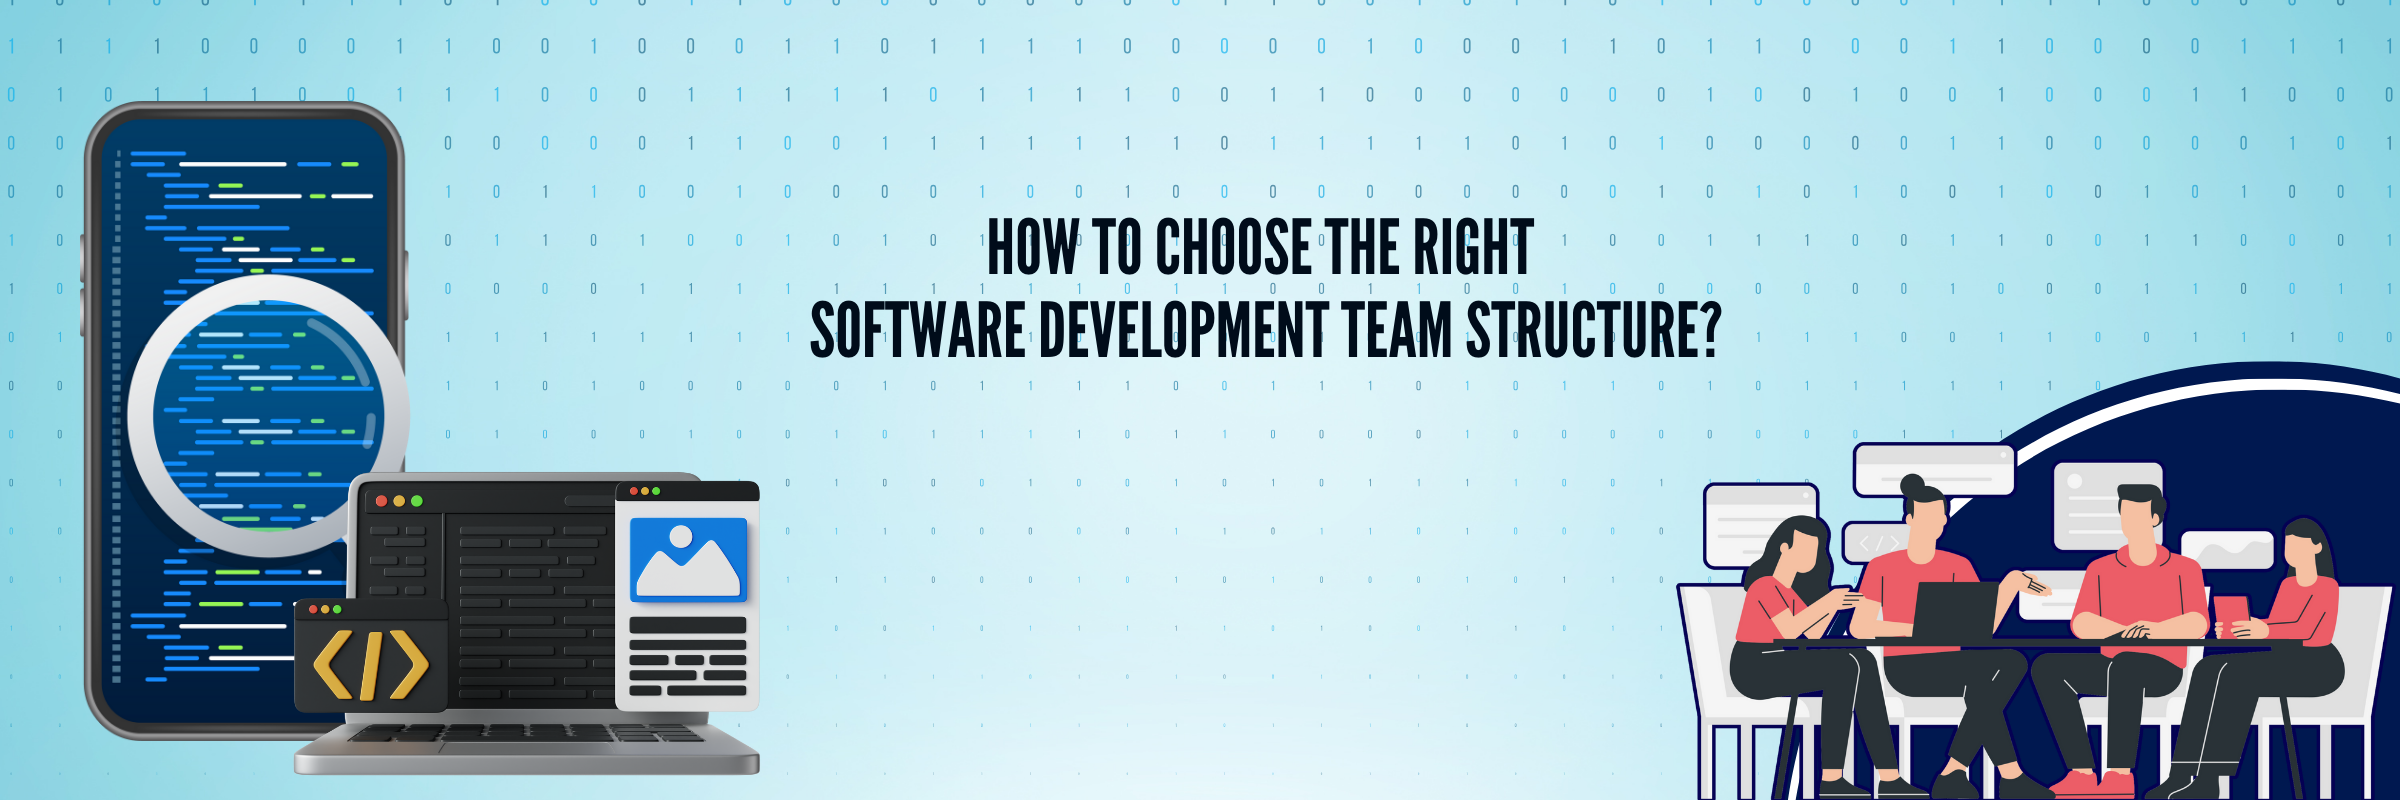 How to Choose the Right Software Development Team Structure?